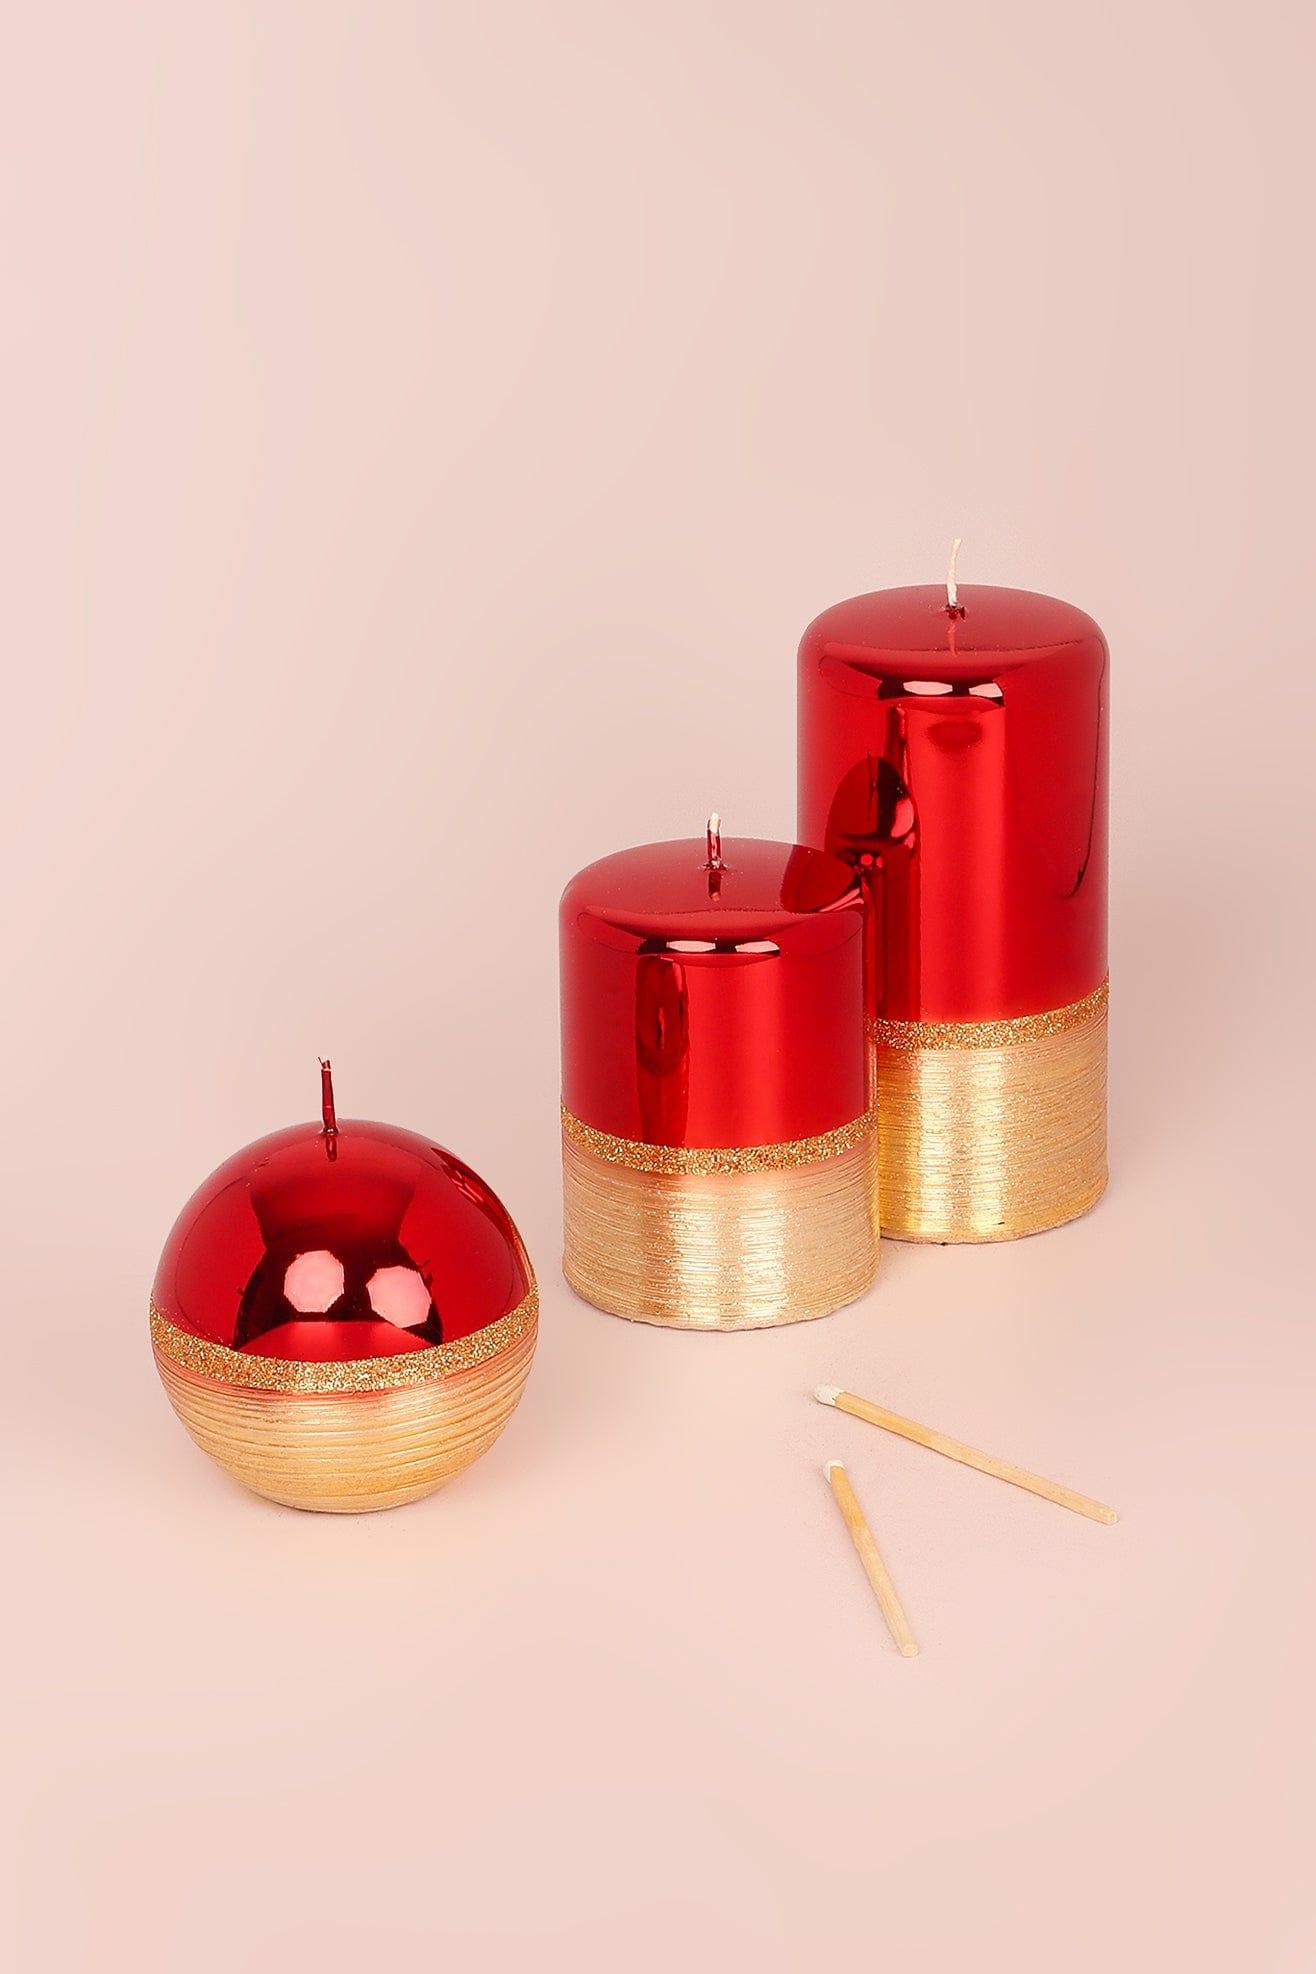 G Decor Candles Red / Set Red and Gold Two Tone Glitter Glass Effect Reflecting Plain Gloss Pillar Candles